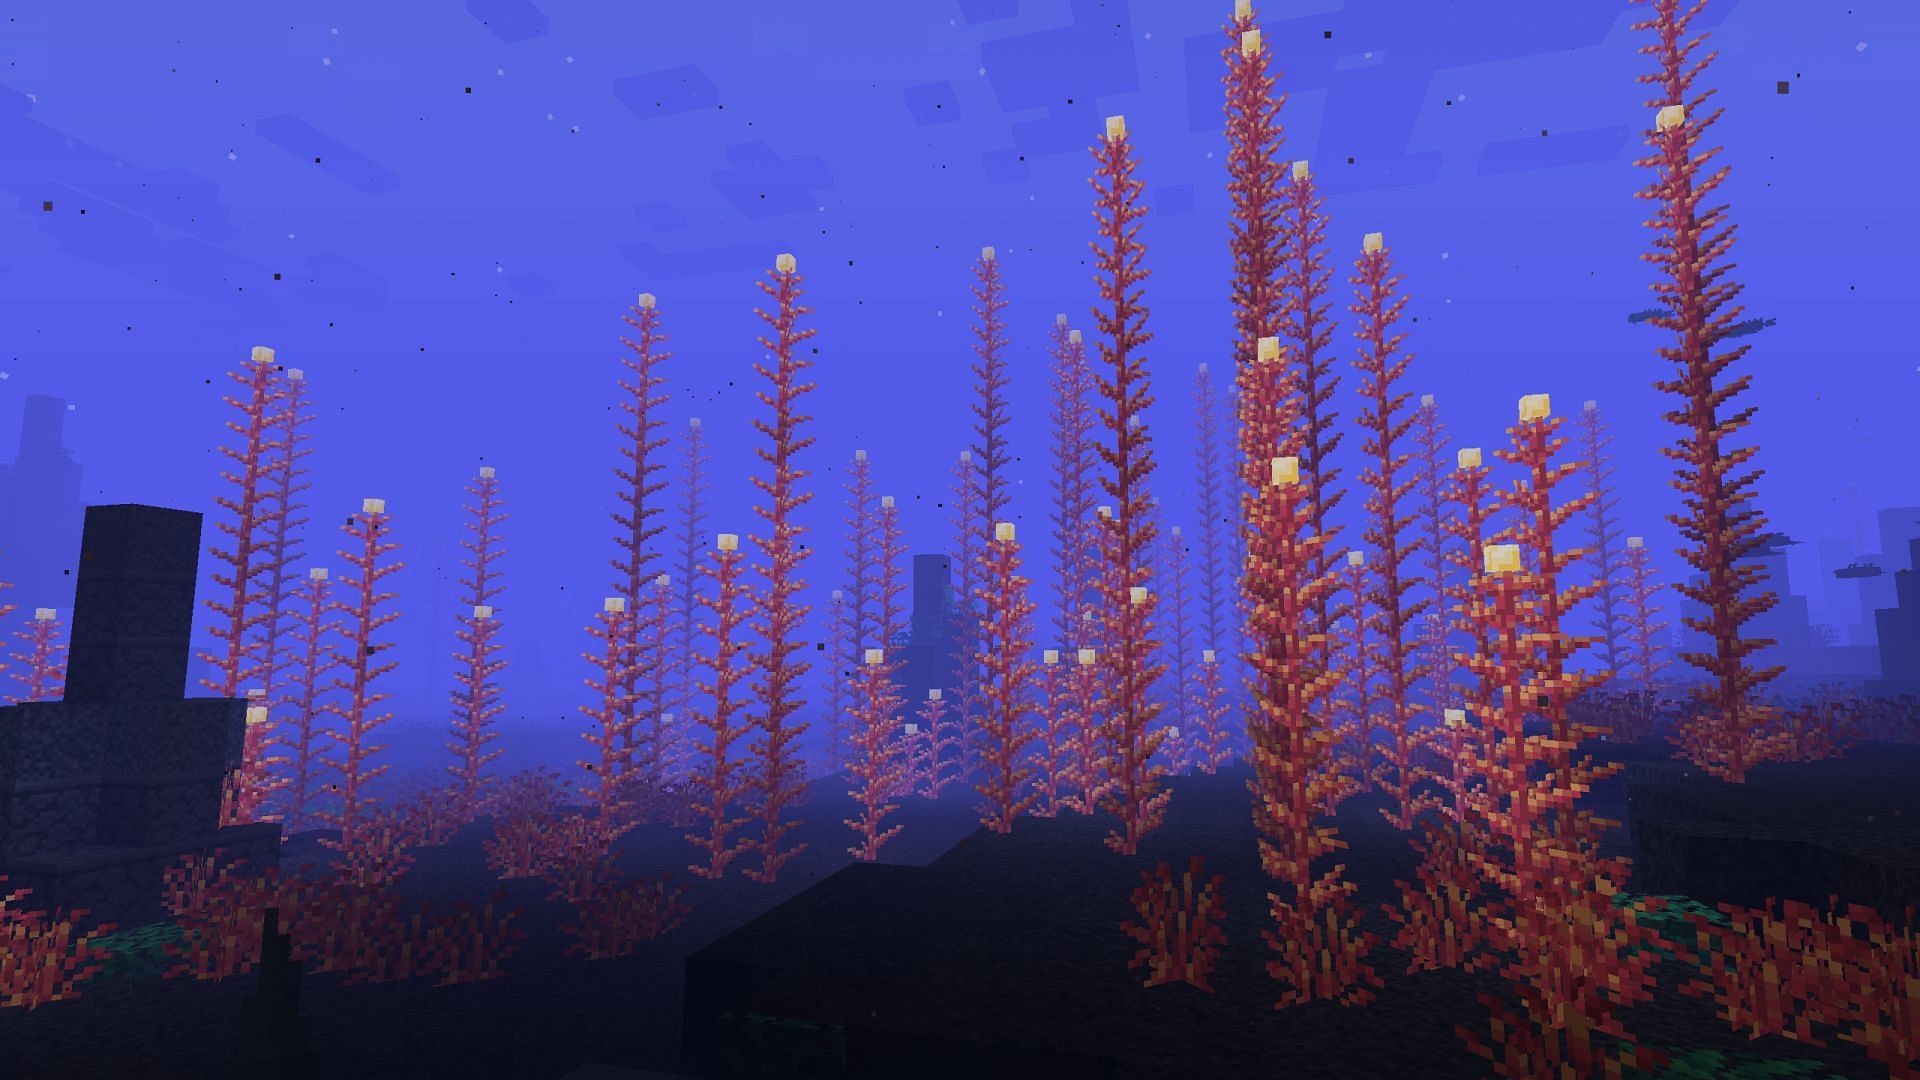 Blue Skies is also a famous mod for adding a new dimension to Minecraft (Image via CurseForge)